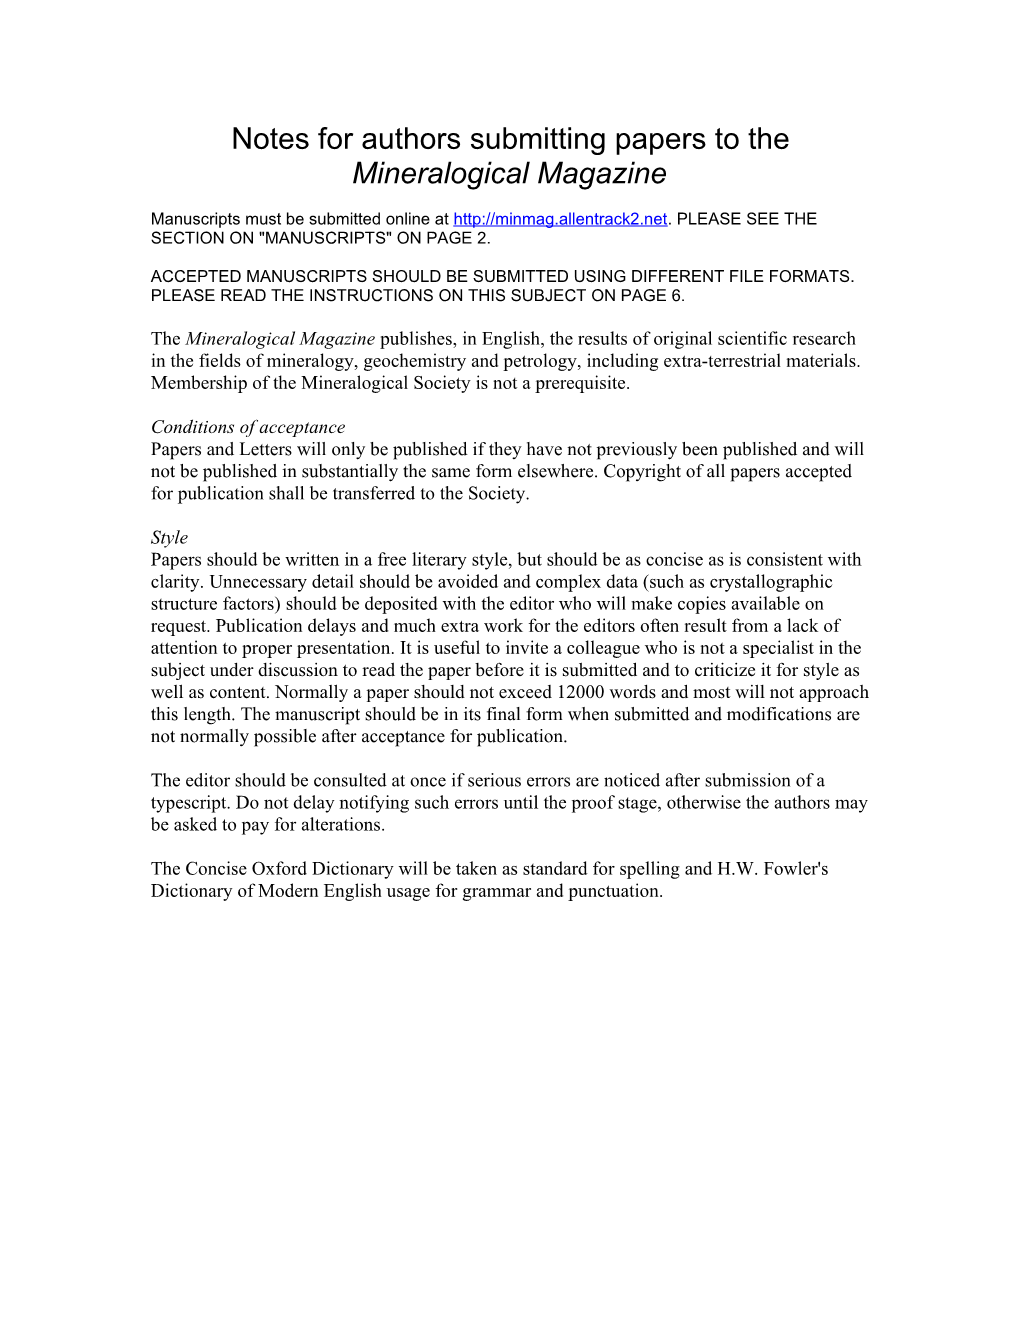 Notes for Authors Submitting Papers to the Mineralogical Magazine